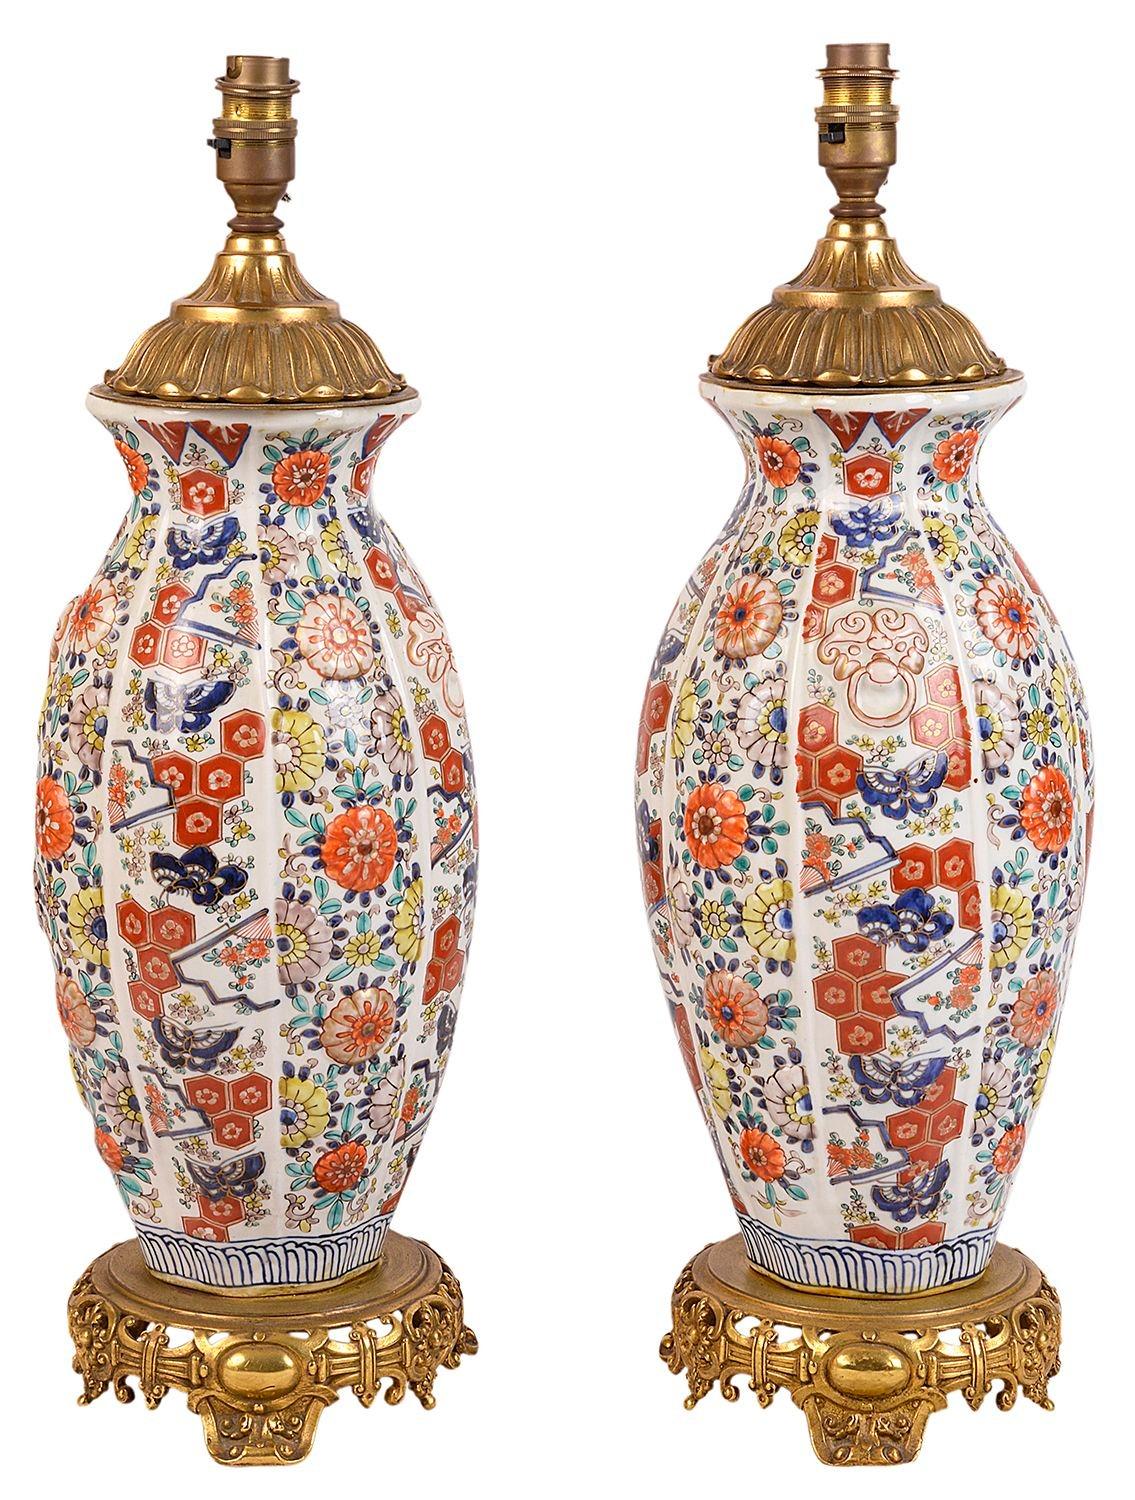 A very good quality pair of 19th century Japanese Imari facetted vases / lamps, each with classical floral and motif decoration, raised on wonderful French gilded ormolu oriental style stands.
 
Batch 72 G9523/2 YYKN.